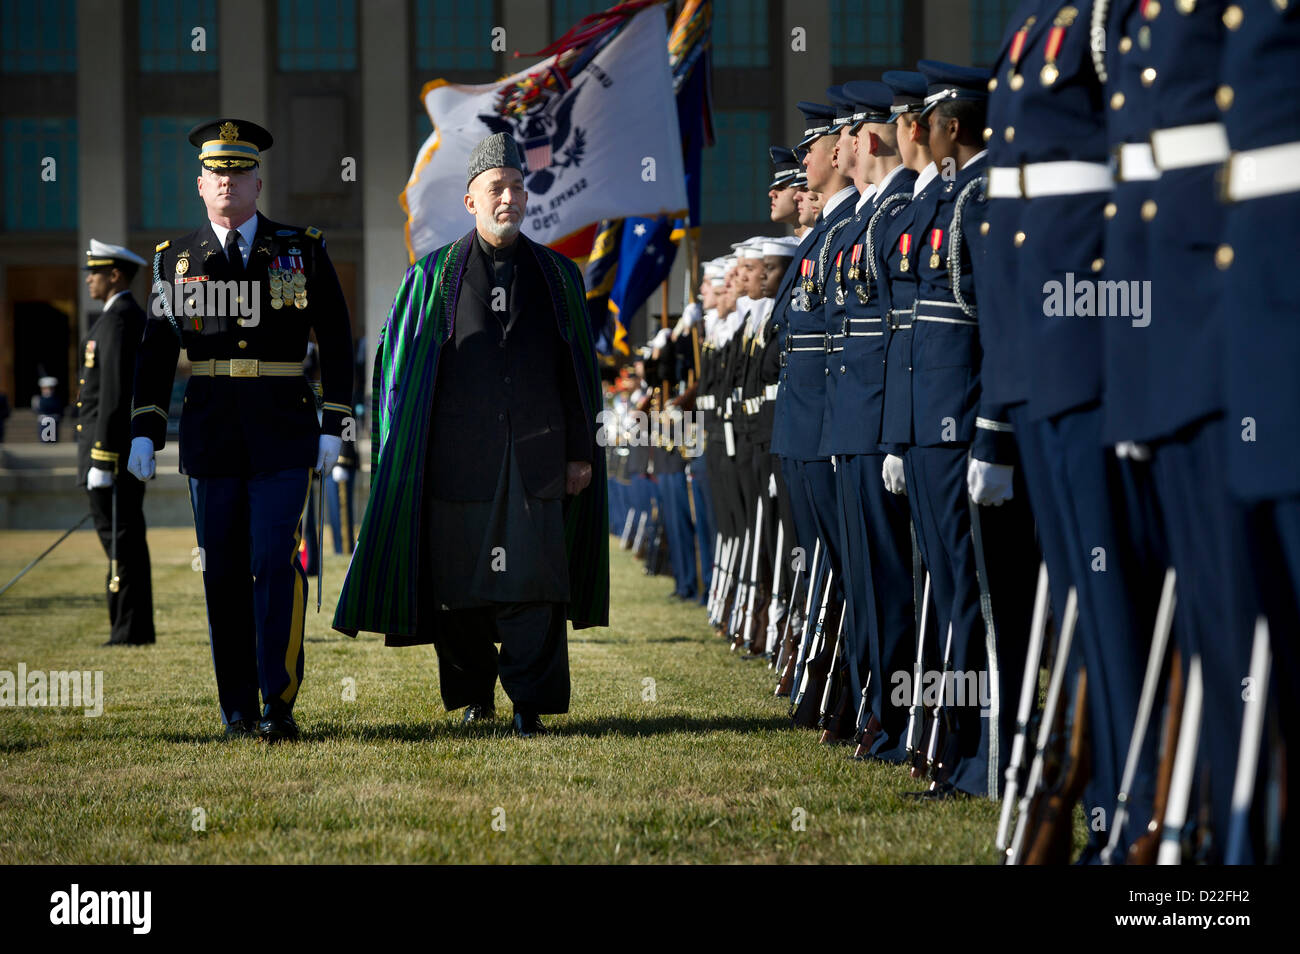 120110-D-TT977-048U.S. Army Col. James Markert escorts Afghanistan's President Hamid Karzai as he inspects the troops in formation on the Pentagon River Parade Field on Jan. 10, 2013.  Secretary of Defense Leon E. Panetta is hosting the full honors arrival ceremony to welcome Karzai to the Pentagon.  Panetta, Karzai and their senior advisors will meet to discuss national security items of interest to both nations.  DoD photo by Petty Officer 1st Class Chad J. McNeeley, U.S. Navy.  (Released) Stock Photo